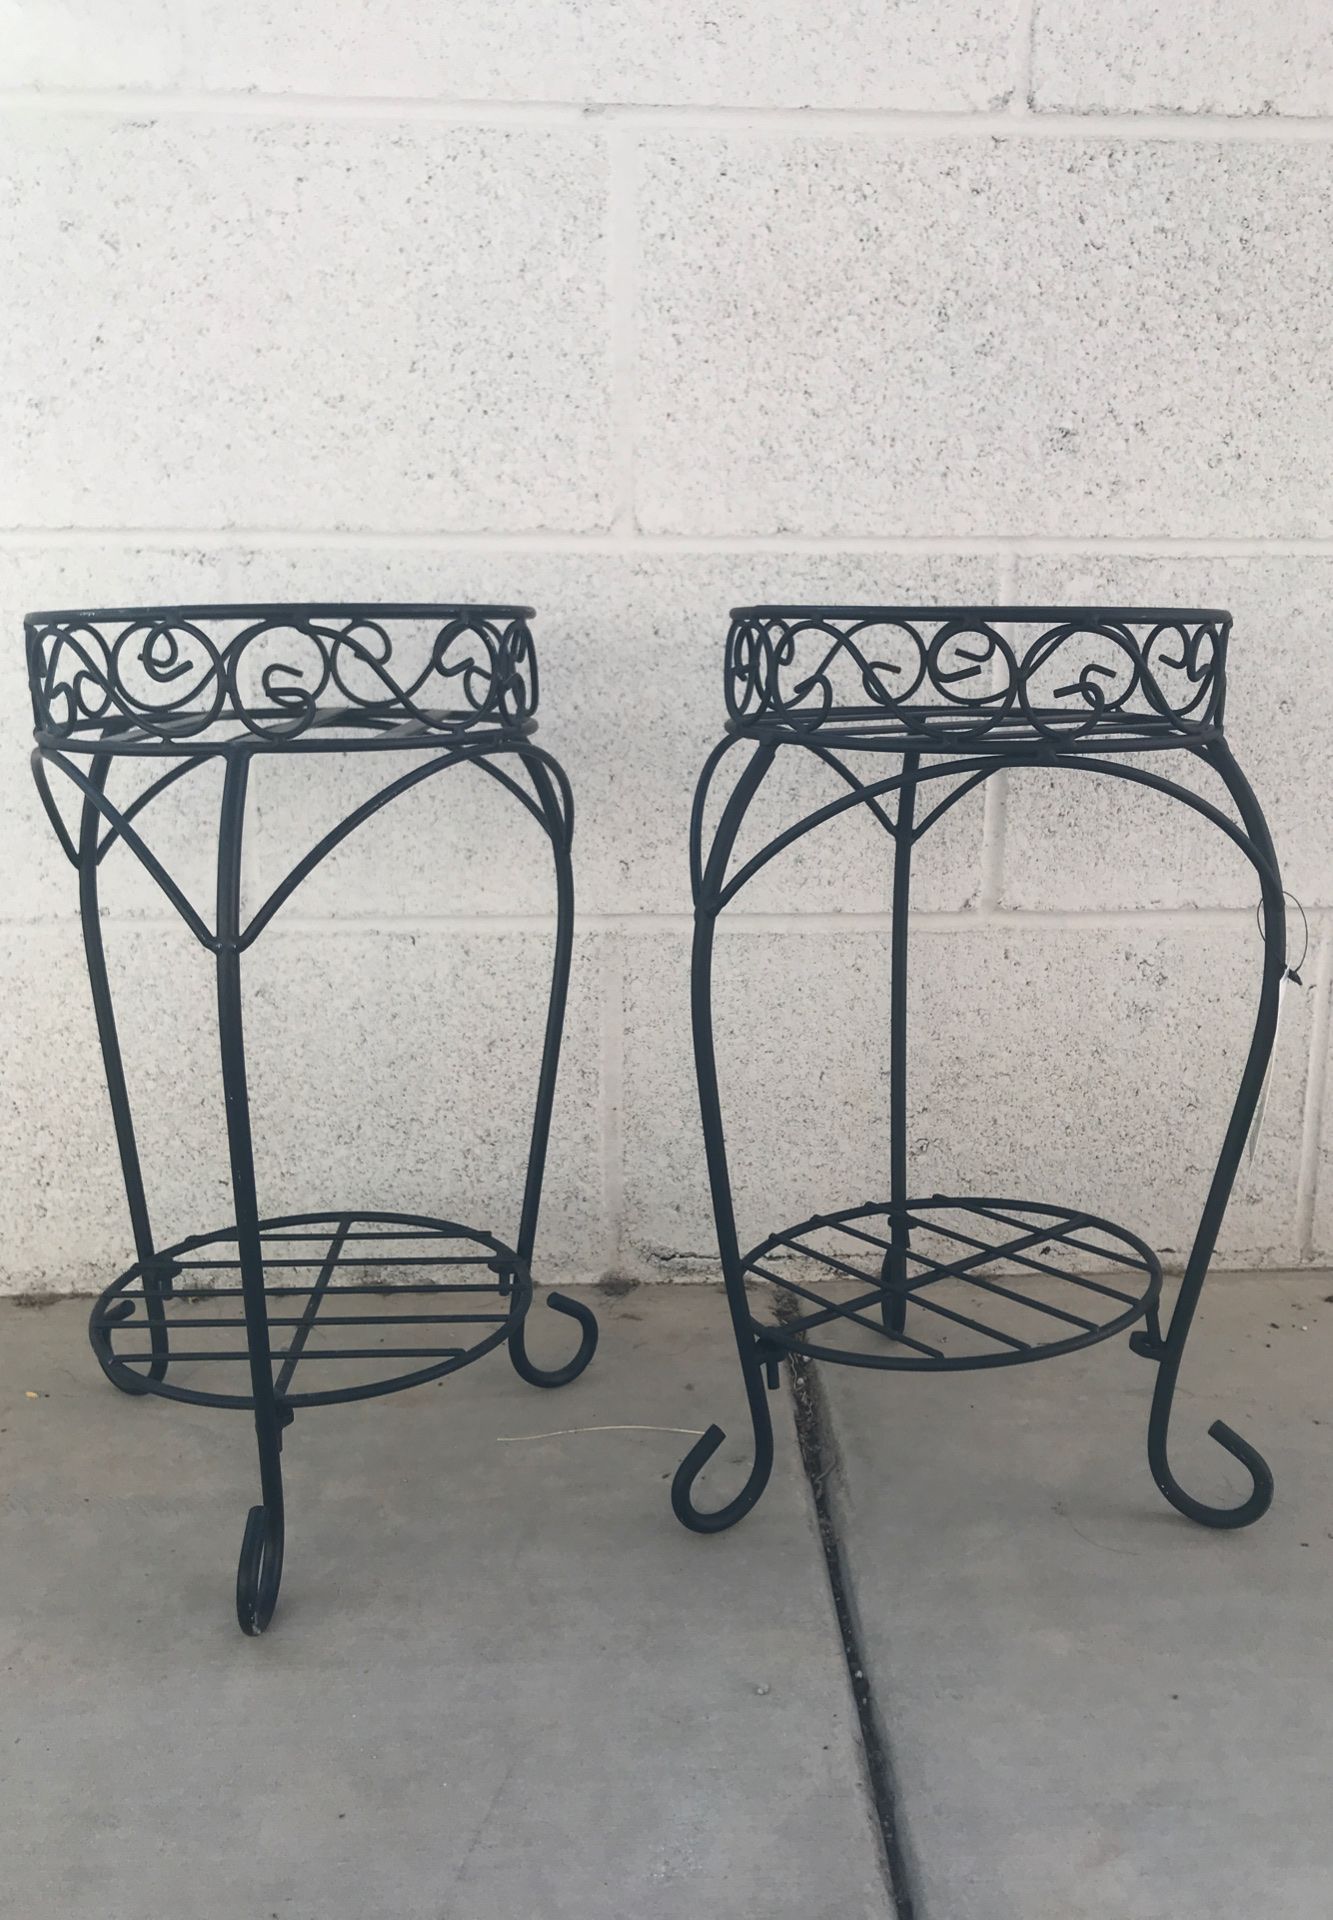 2 Plant stands